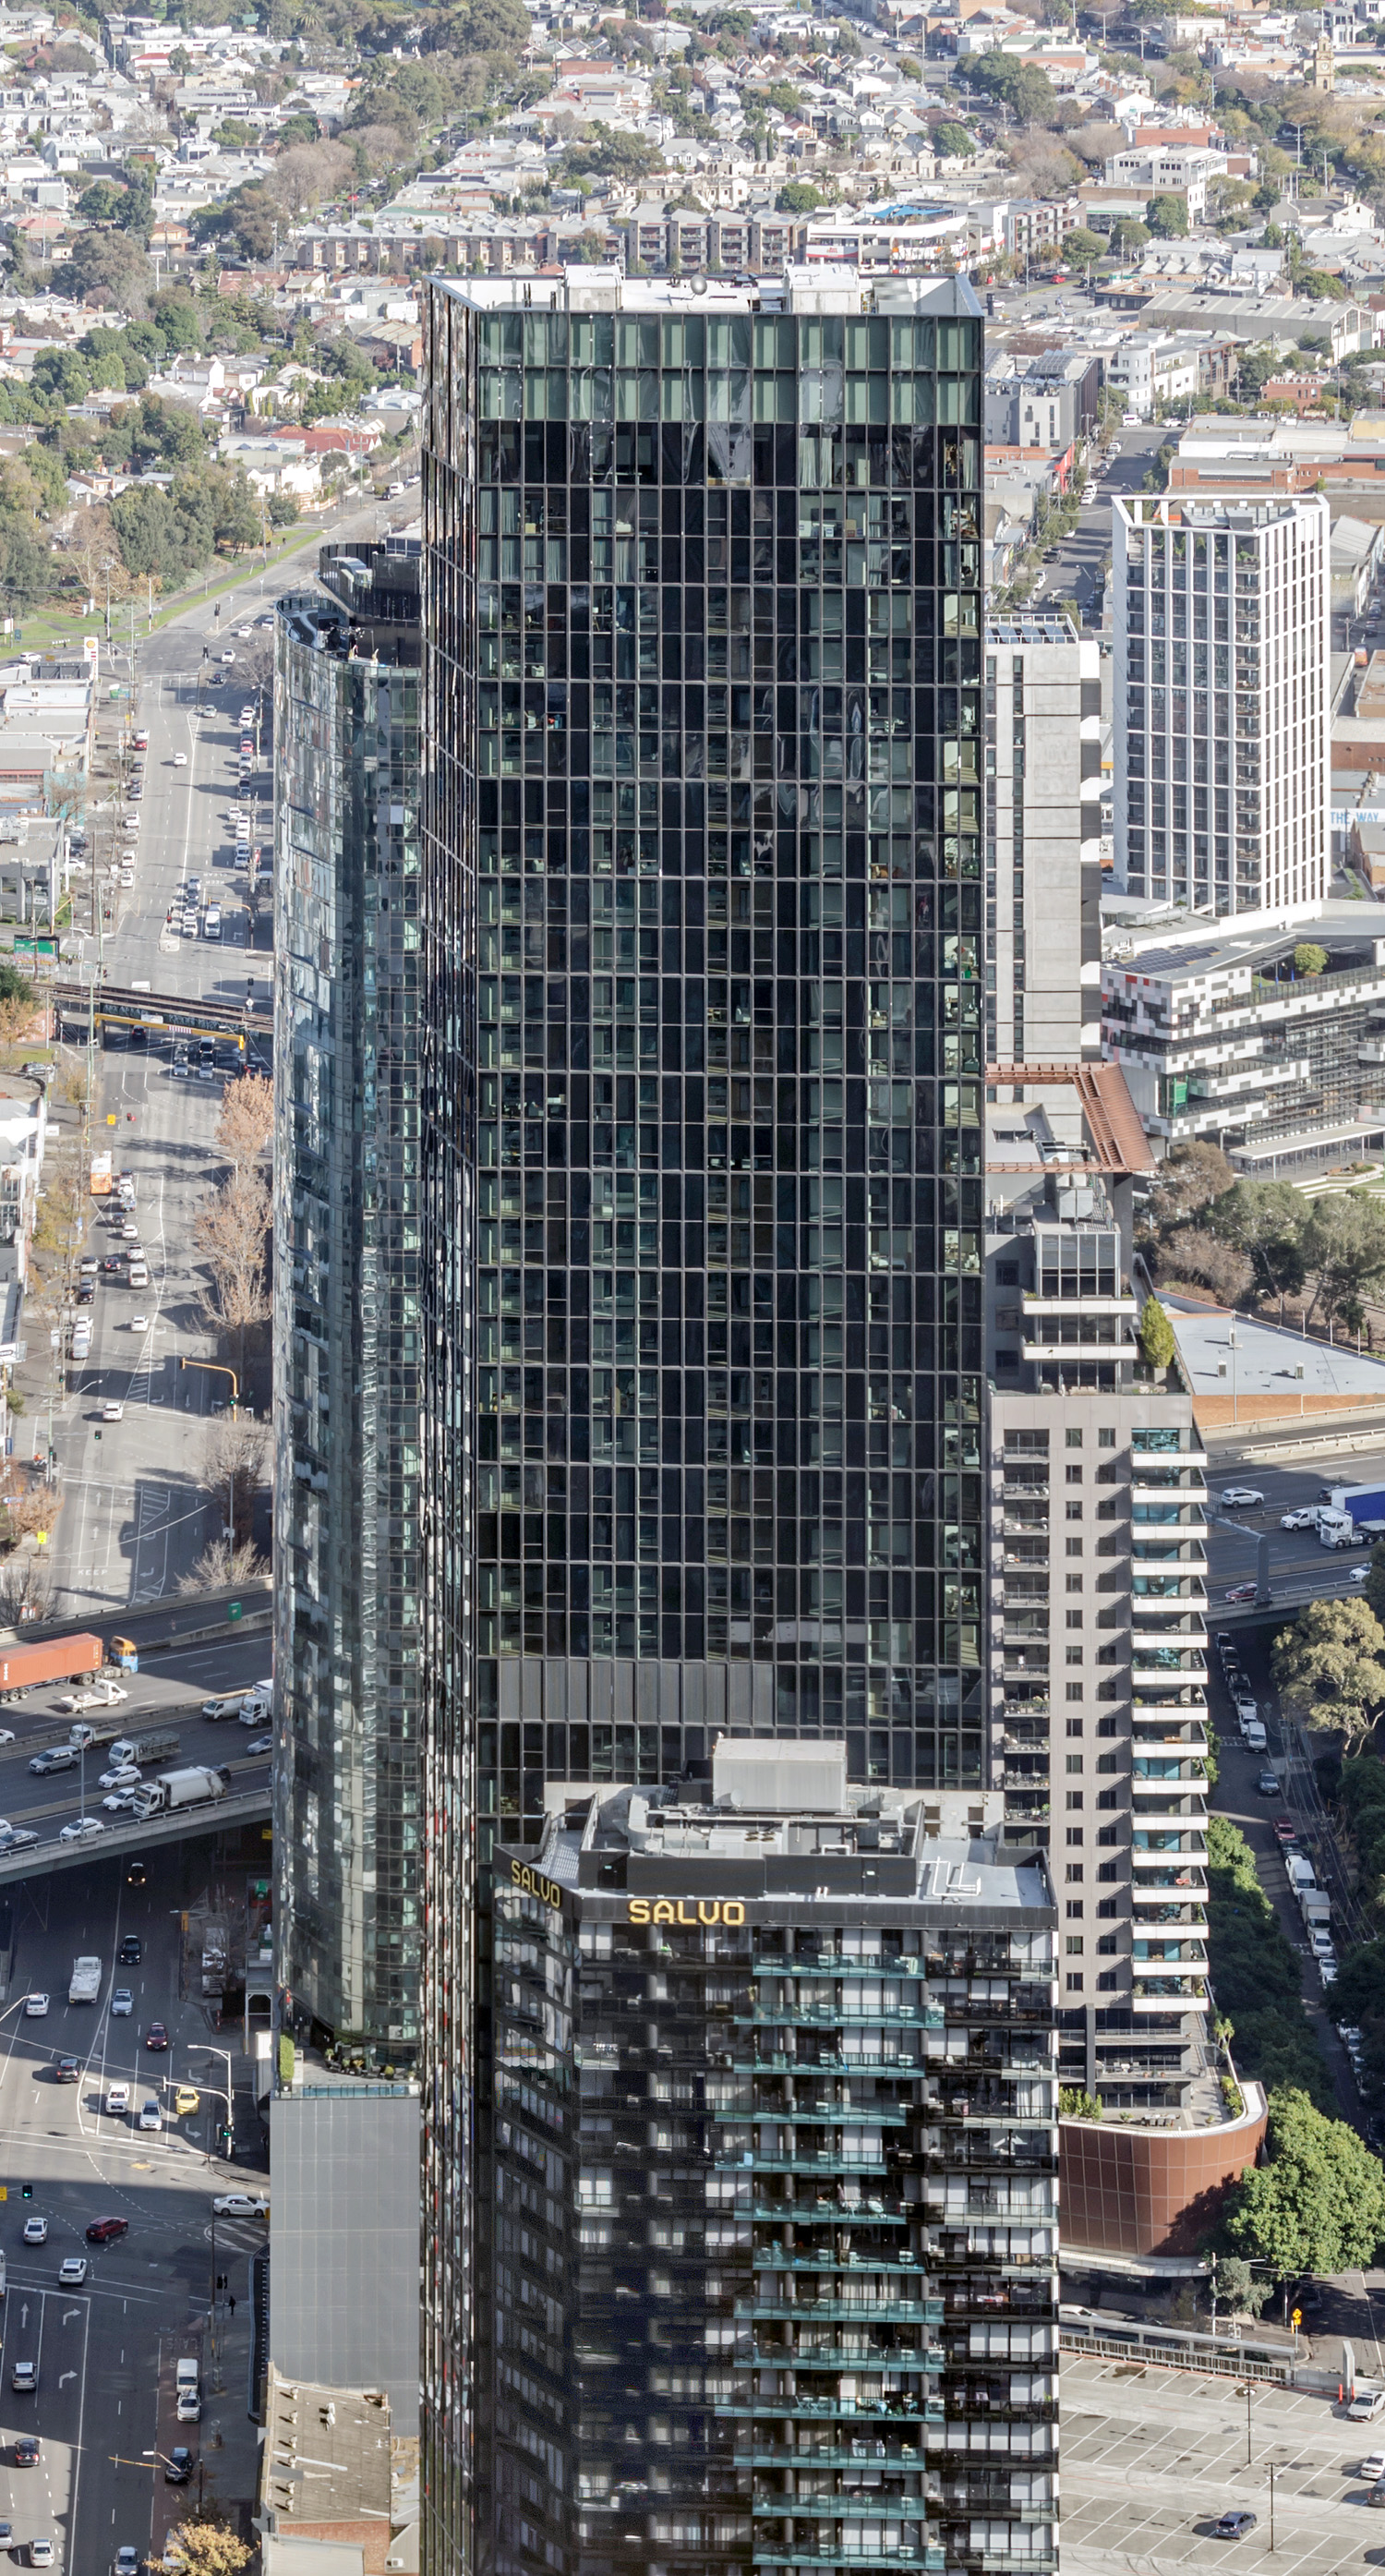 Home Southbank, Melbourne - View from Eureka Tower. © Mathias Beinling